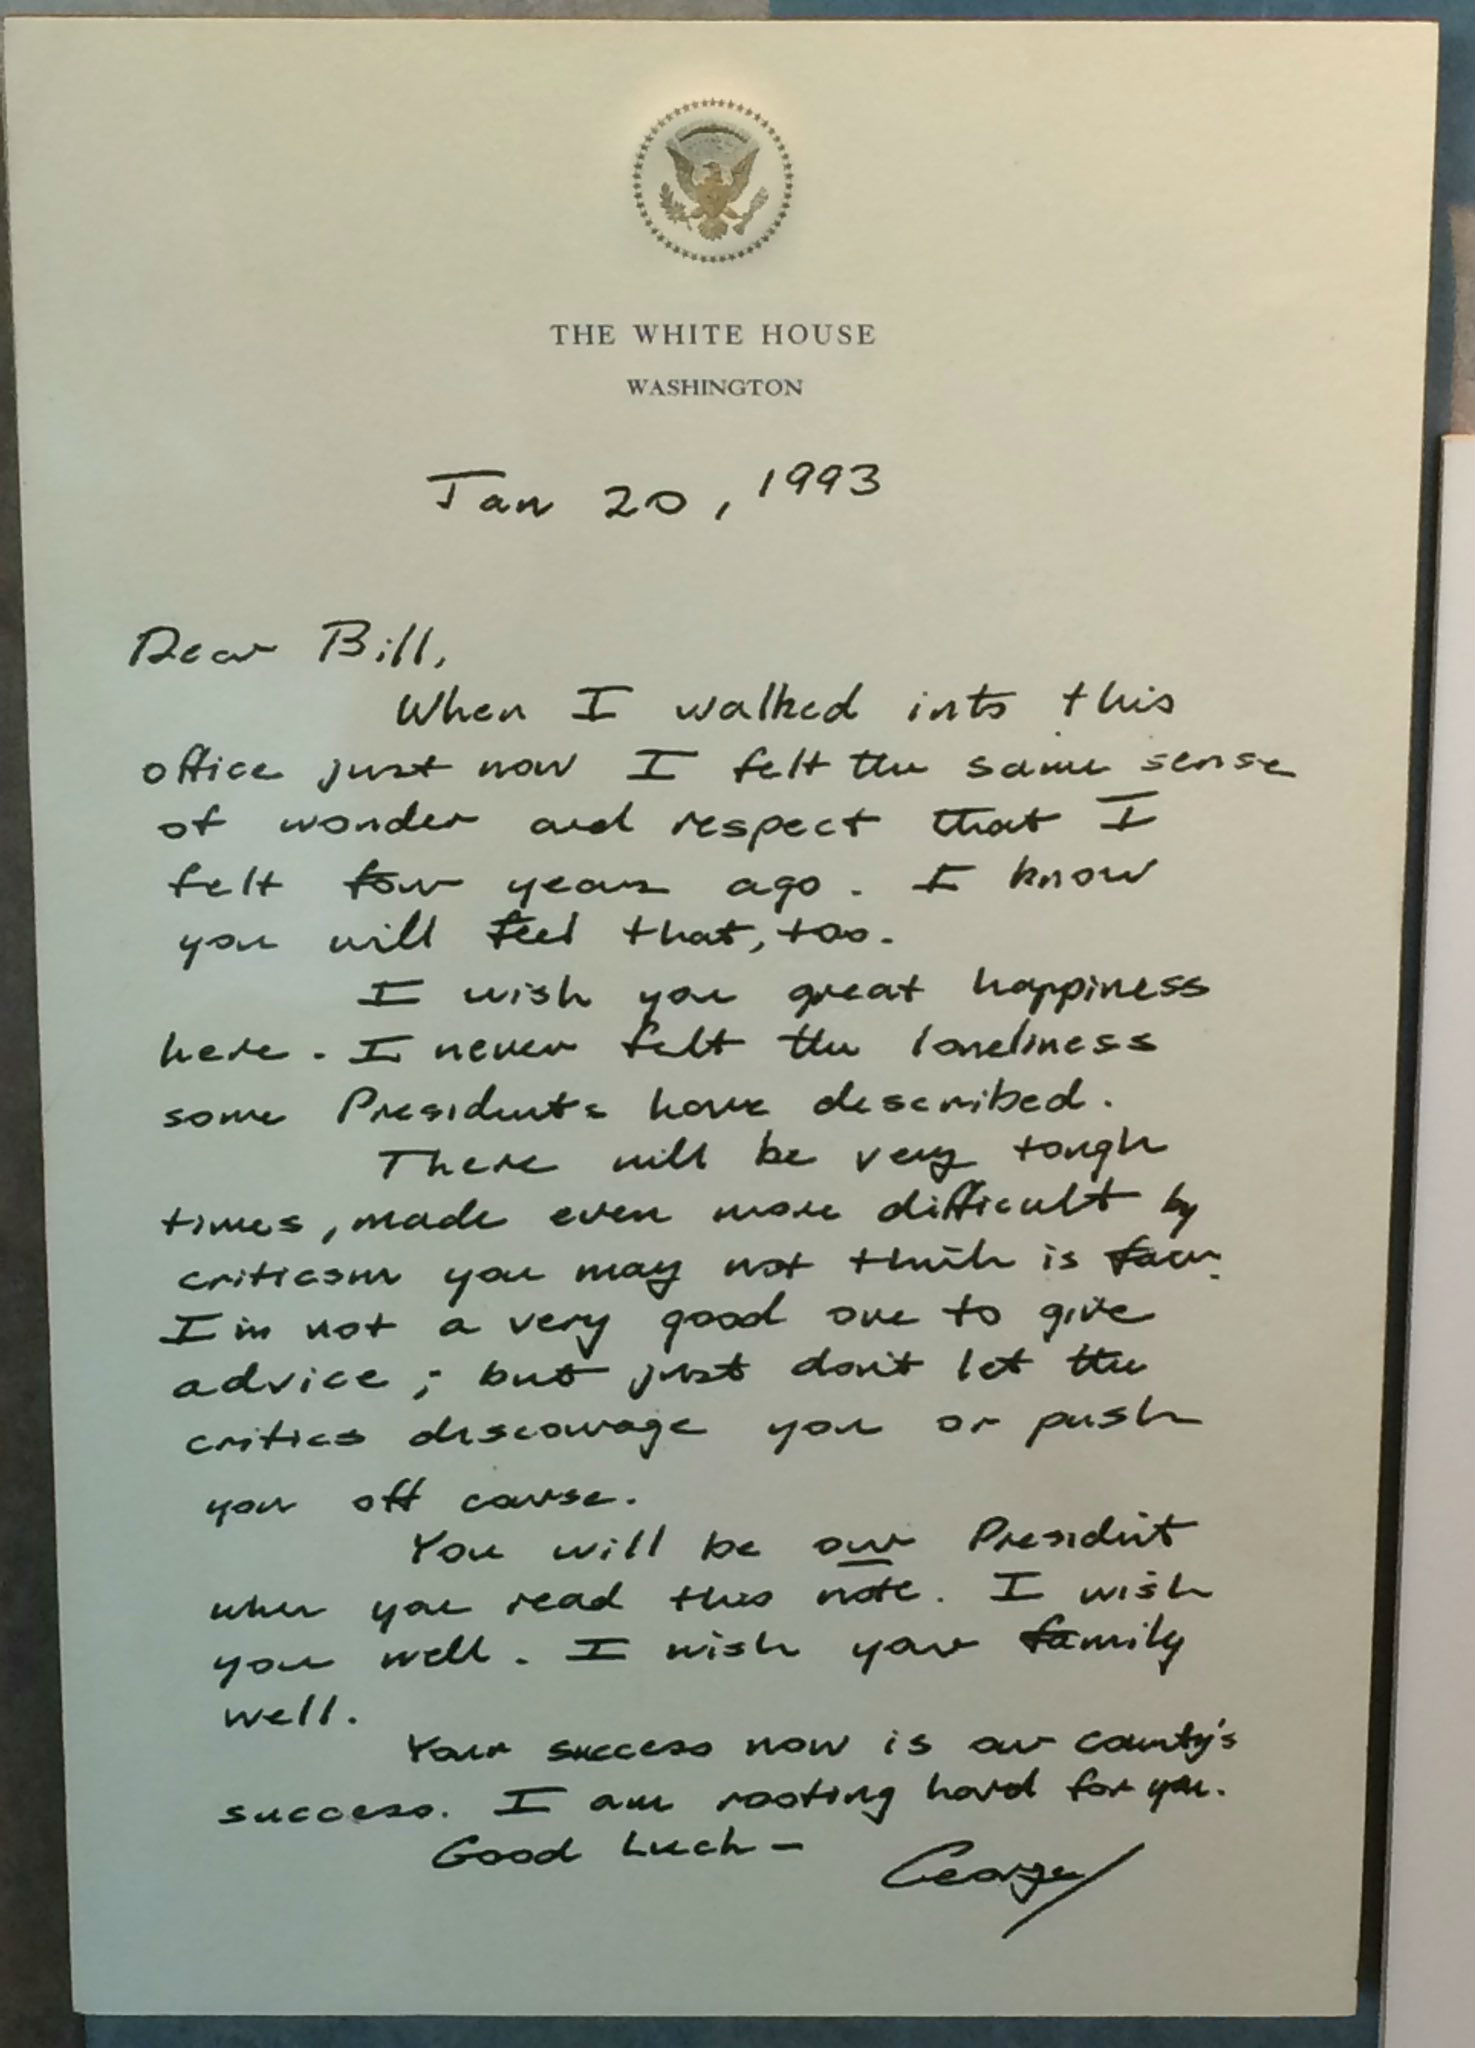 George H. W. Bush's letter to Bill Clinton on the day Bill Clinton assumed the office of President of the United States.